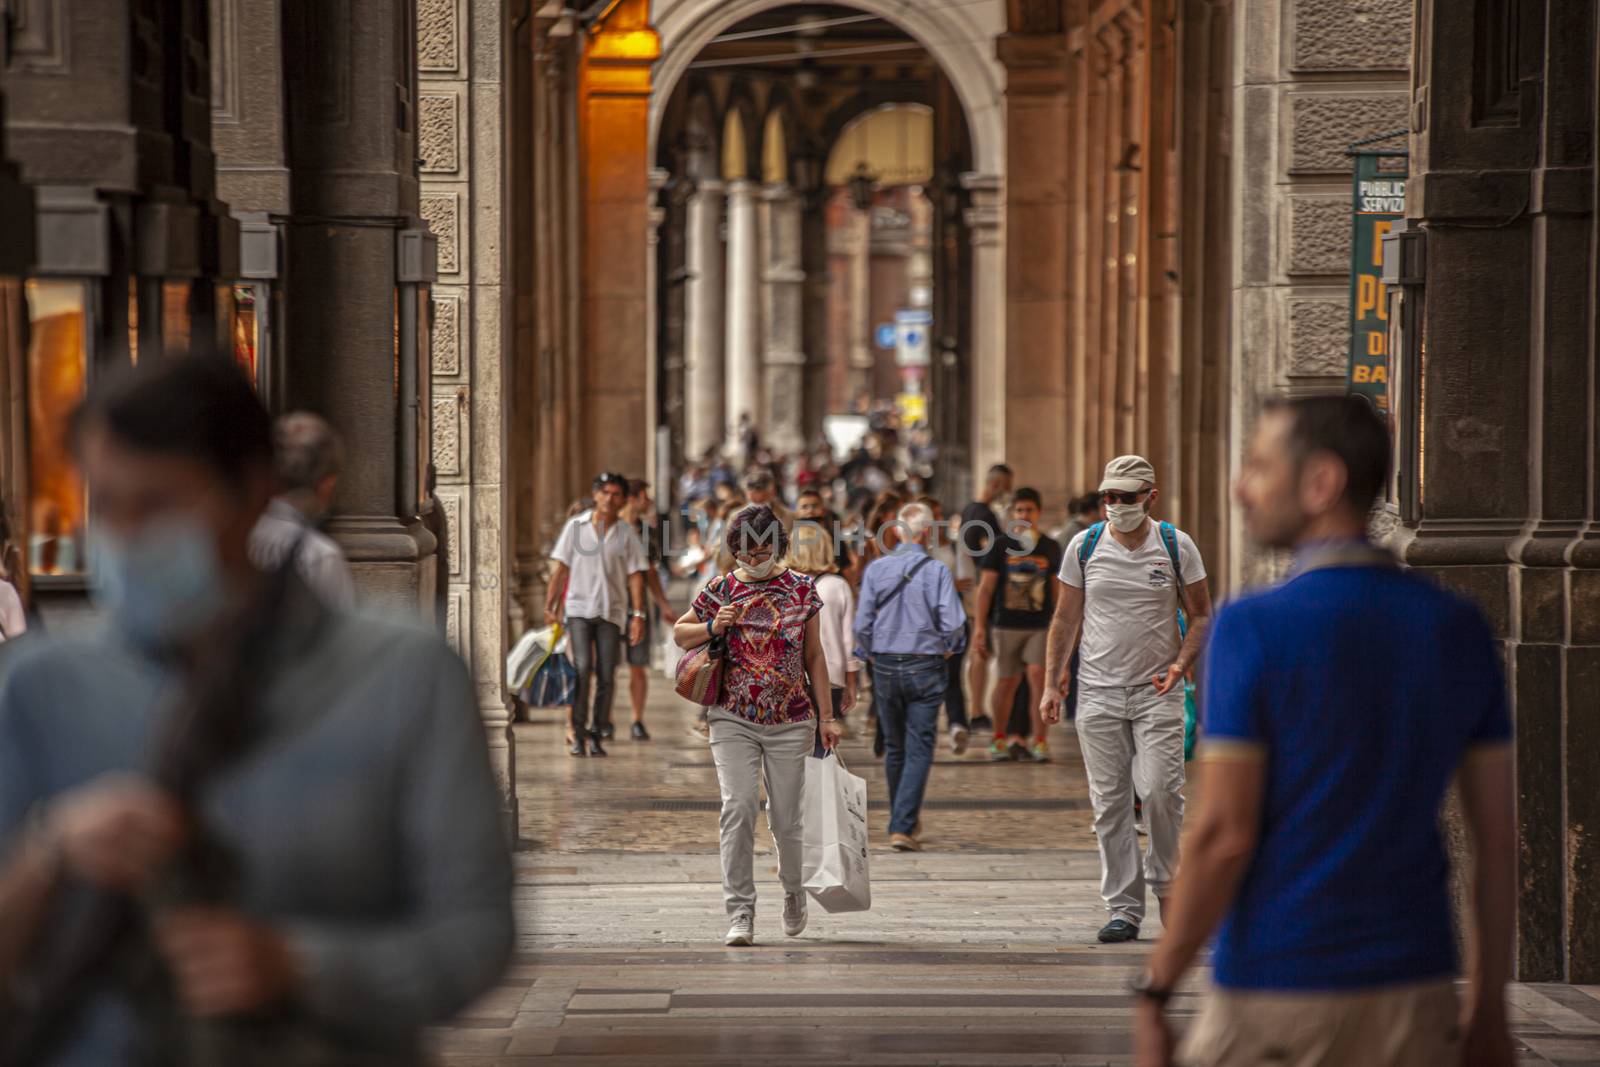 BOLOGNA, ITALY 17 JUNE 2020: People walking under arcades in Bologna, Italy